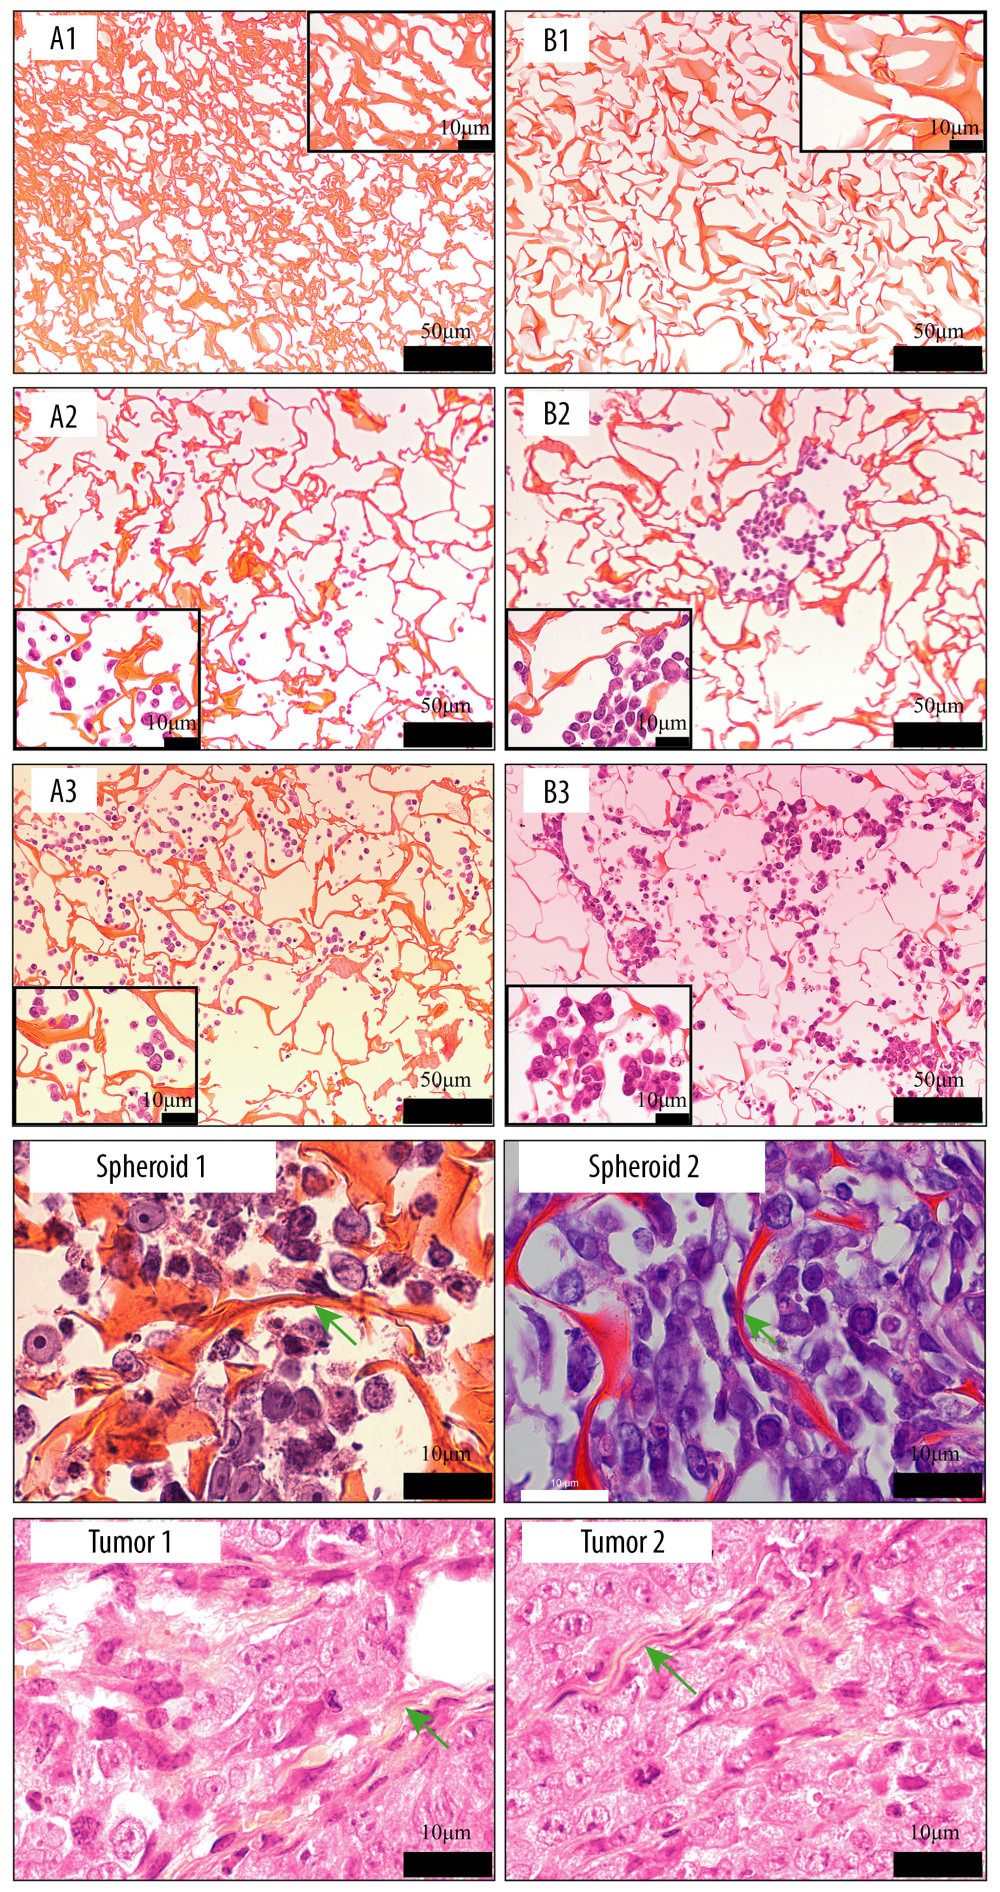 Images of hematoxylin and eosin staining of scaffold. Silk fibroin (SF)/chitosan (Cs) (1: 1) scaffold without cells (A1), SF/Cs/alginate (Alg) (1: 1: 1) scaffold without cells (B1), SF/Cs (1: 1) scaffold with cells on day 3 (A2), SF/Cs/Alg (1: 1: 1) scaffold with cells on day 3 (B2), SF/Cs (1: 1) scaffold with cells on day 7 (A3), SF/Cs/Alg (1: 1: 1) scaffold with cells on day 7 (B3). Spheroids formed in the SF/Cs (1: 1) scaffold are observed under oil lens of Leica DM2500 (spheroid 1). Spheroids formed in the SF/Cs/Alg (1: 1: 1) scaffold are observed under oil lens of Leica DM2500 (spheroid 2). Tumor formed subcutaneously in nude mice after inoculation with HCT-116 cells, observed under oil lens of Leica DM2500 (tumor 1, 2). Green arrows indicate the fiber band.